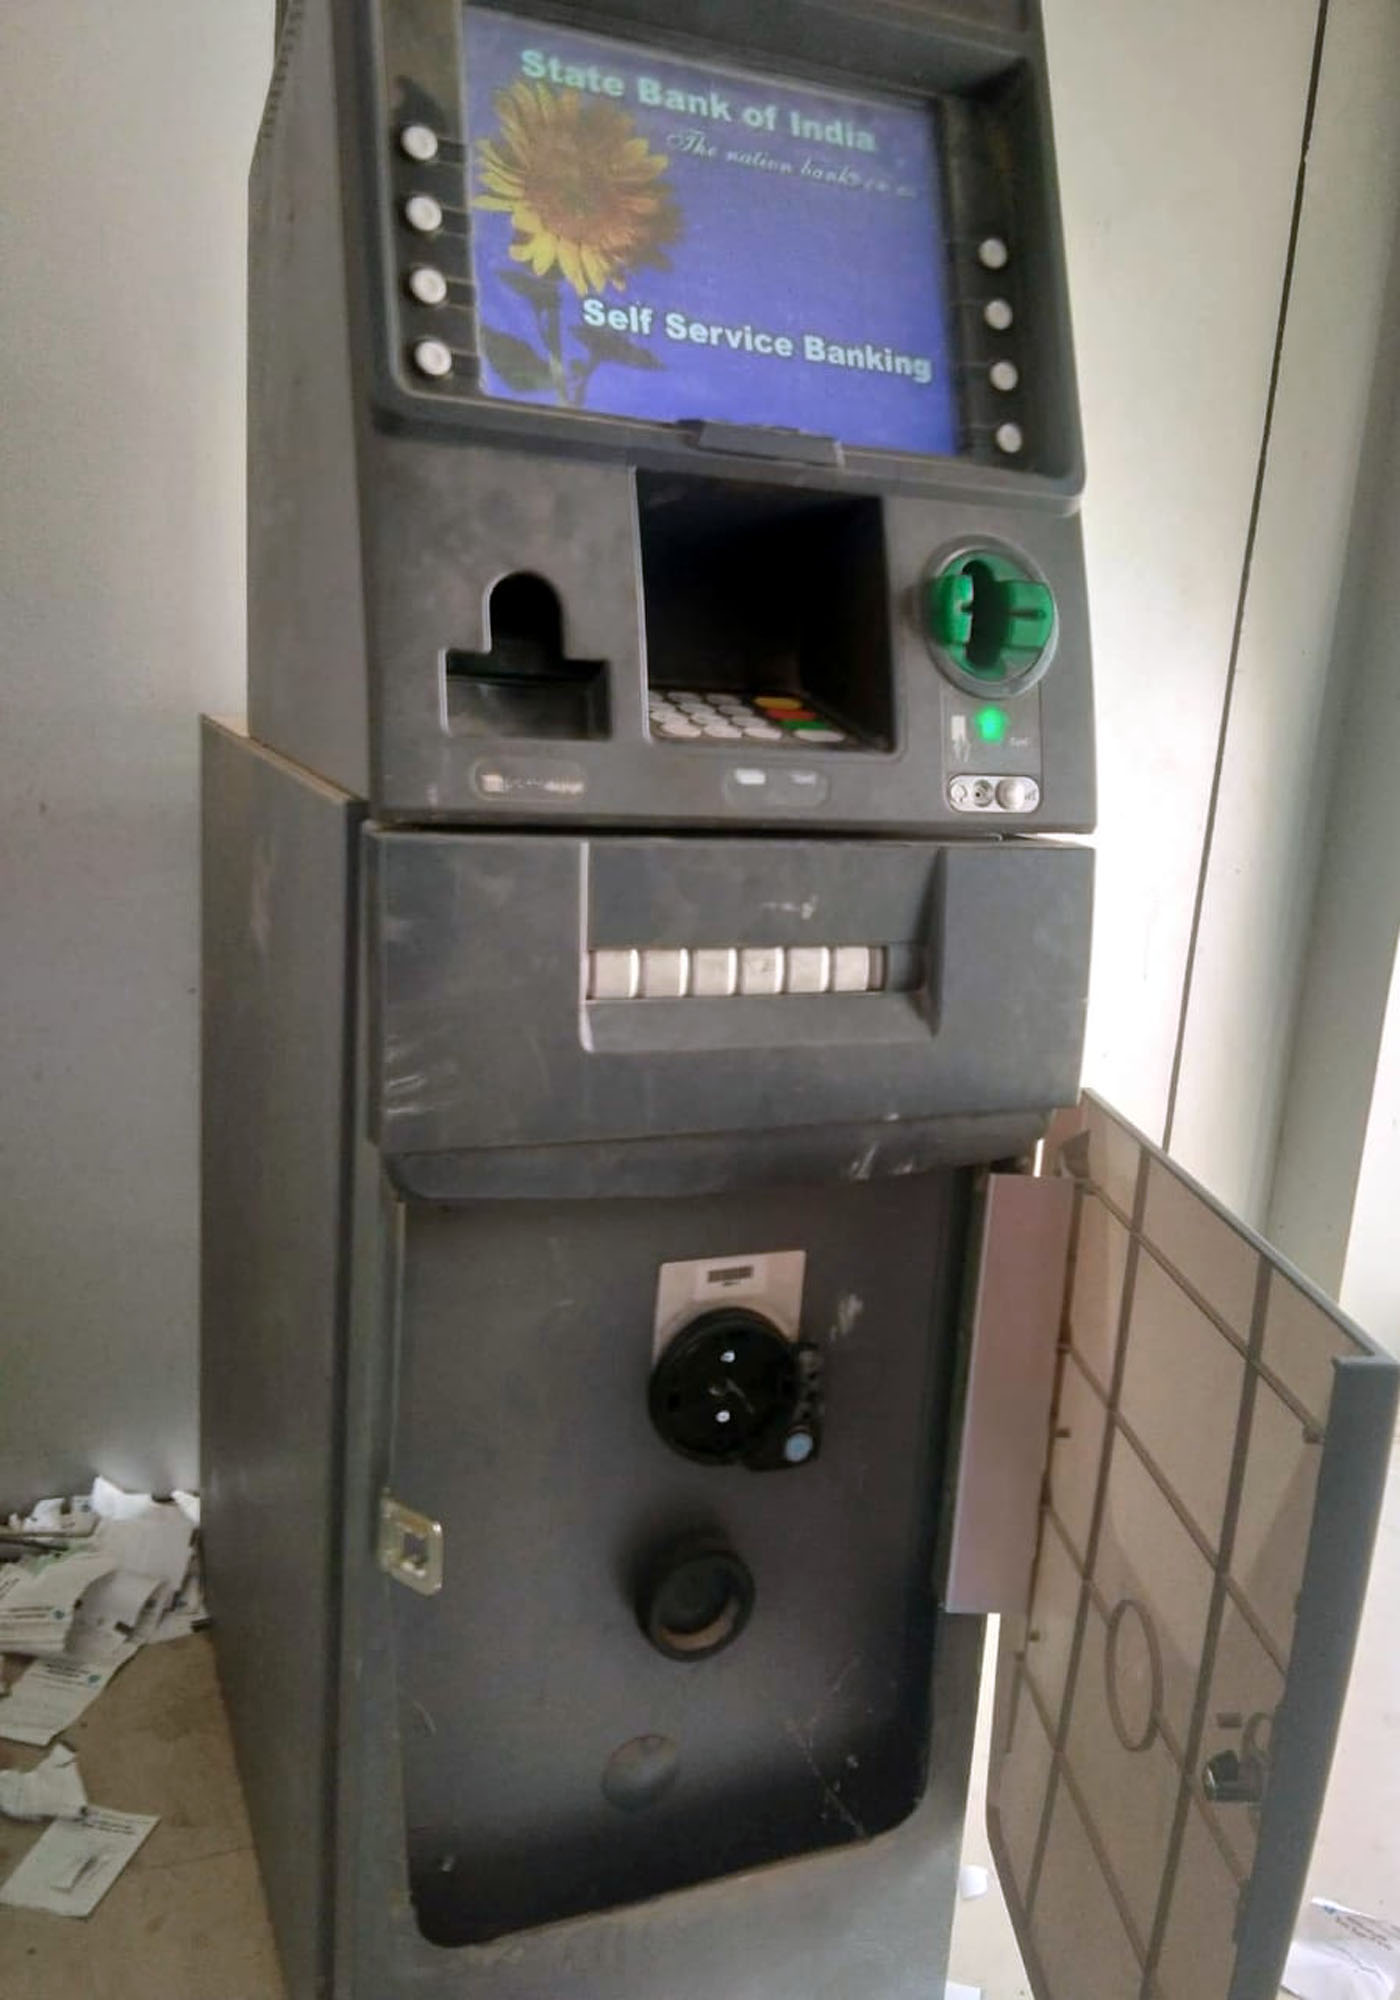 Attempts to steal money from ATMs